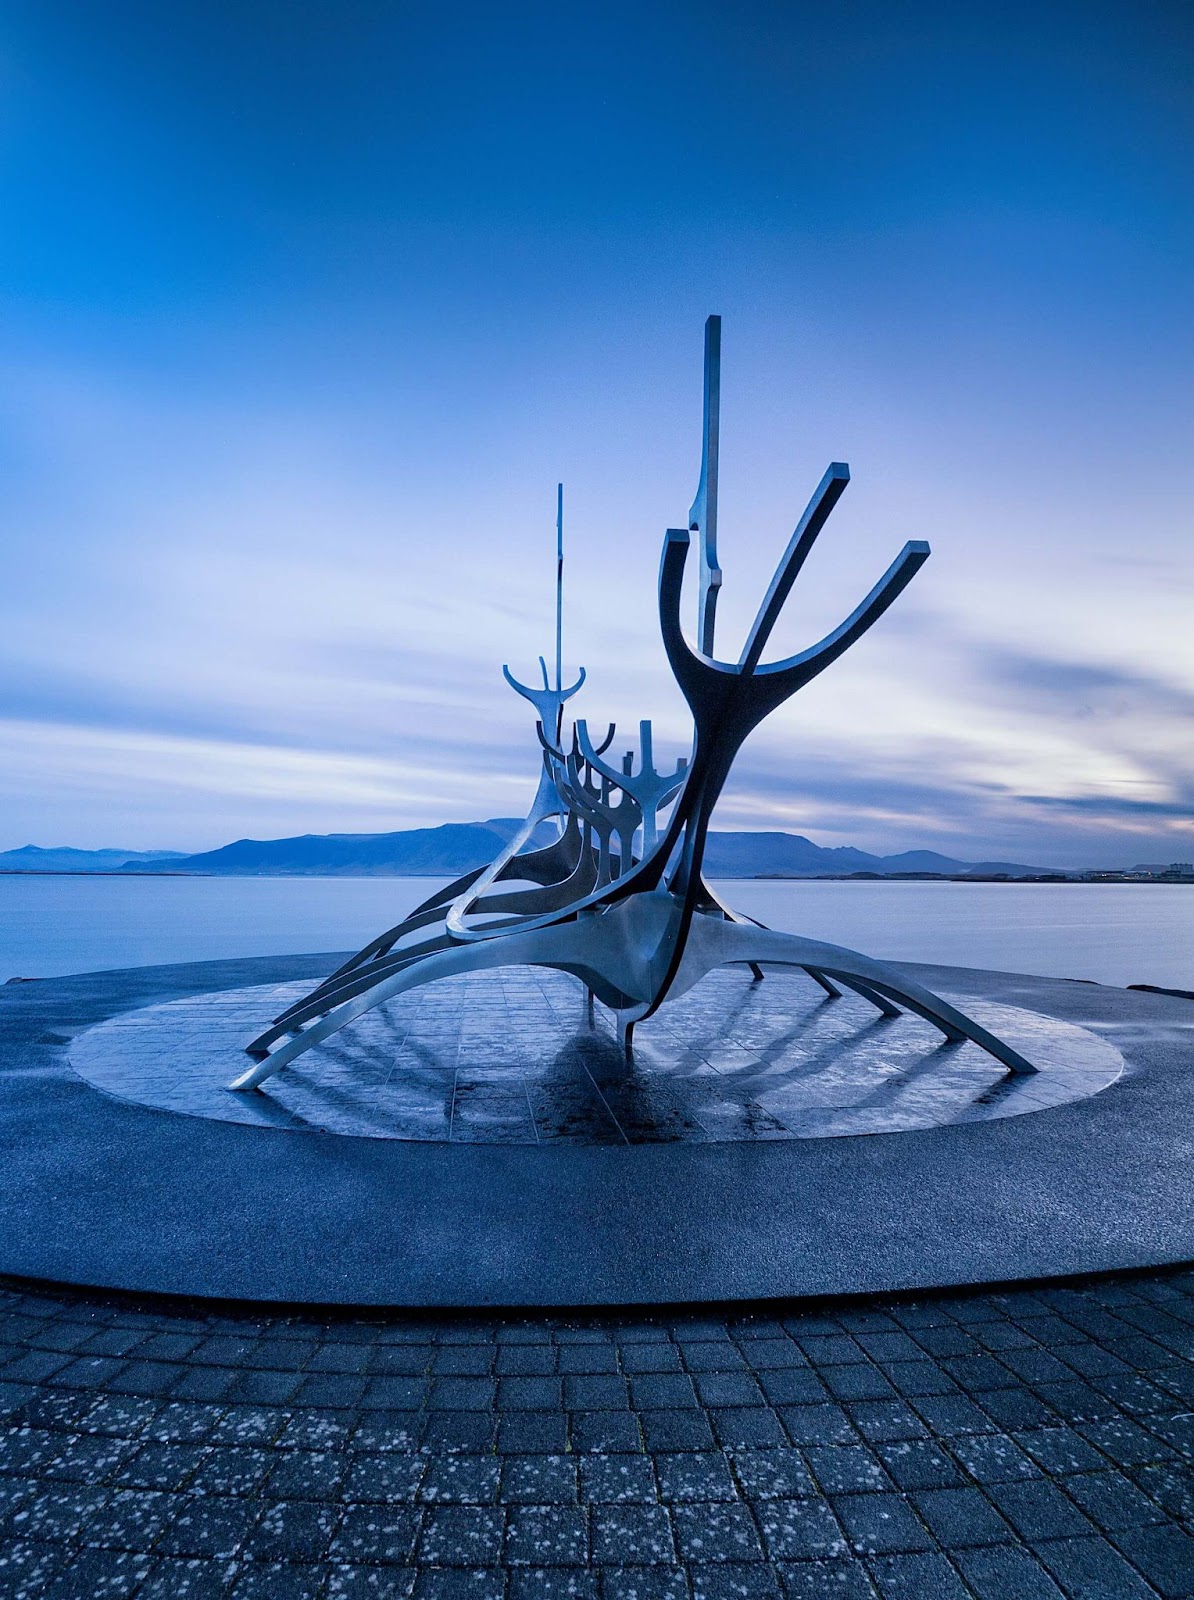 1 day in Reykjavik, Sun Voyager sculpture facing the mountains. This is a sculpture to convey a dream of hope, progress, and freedom.